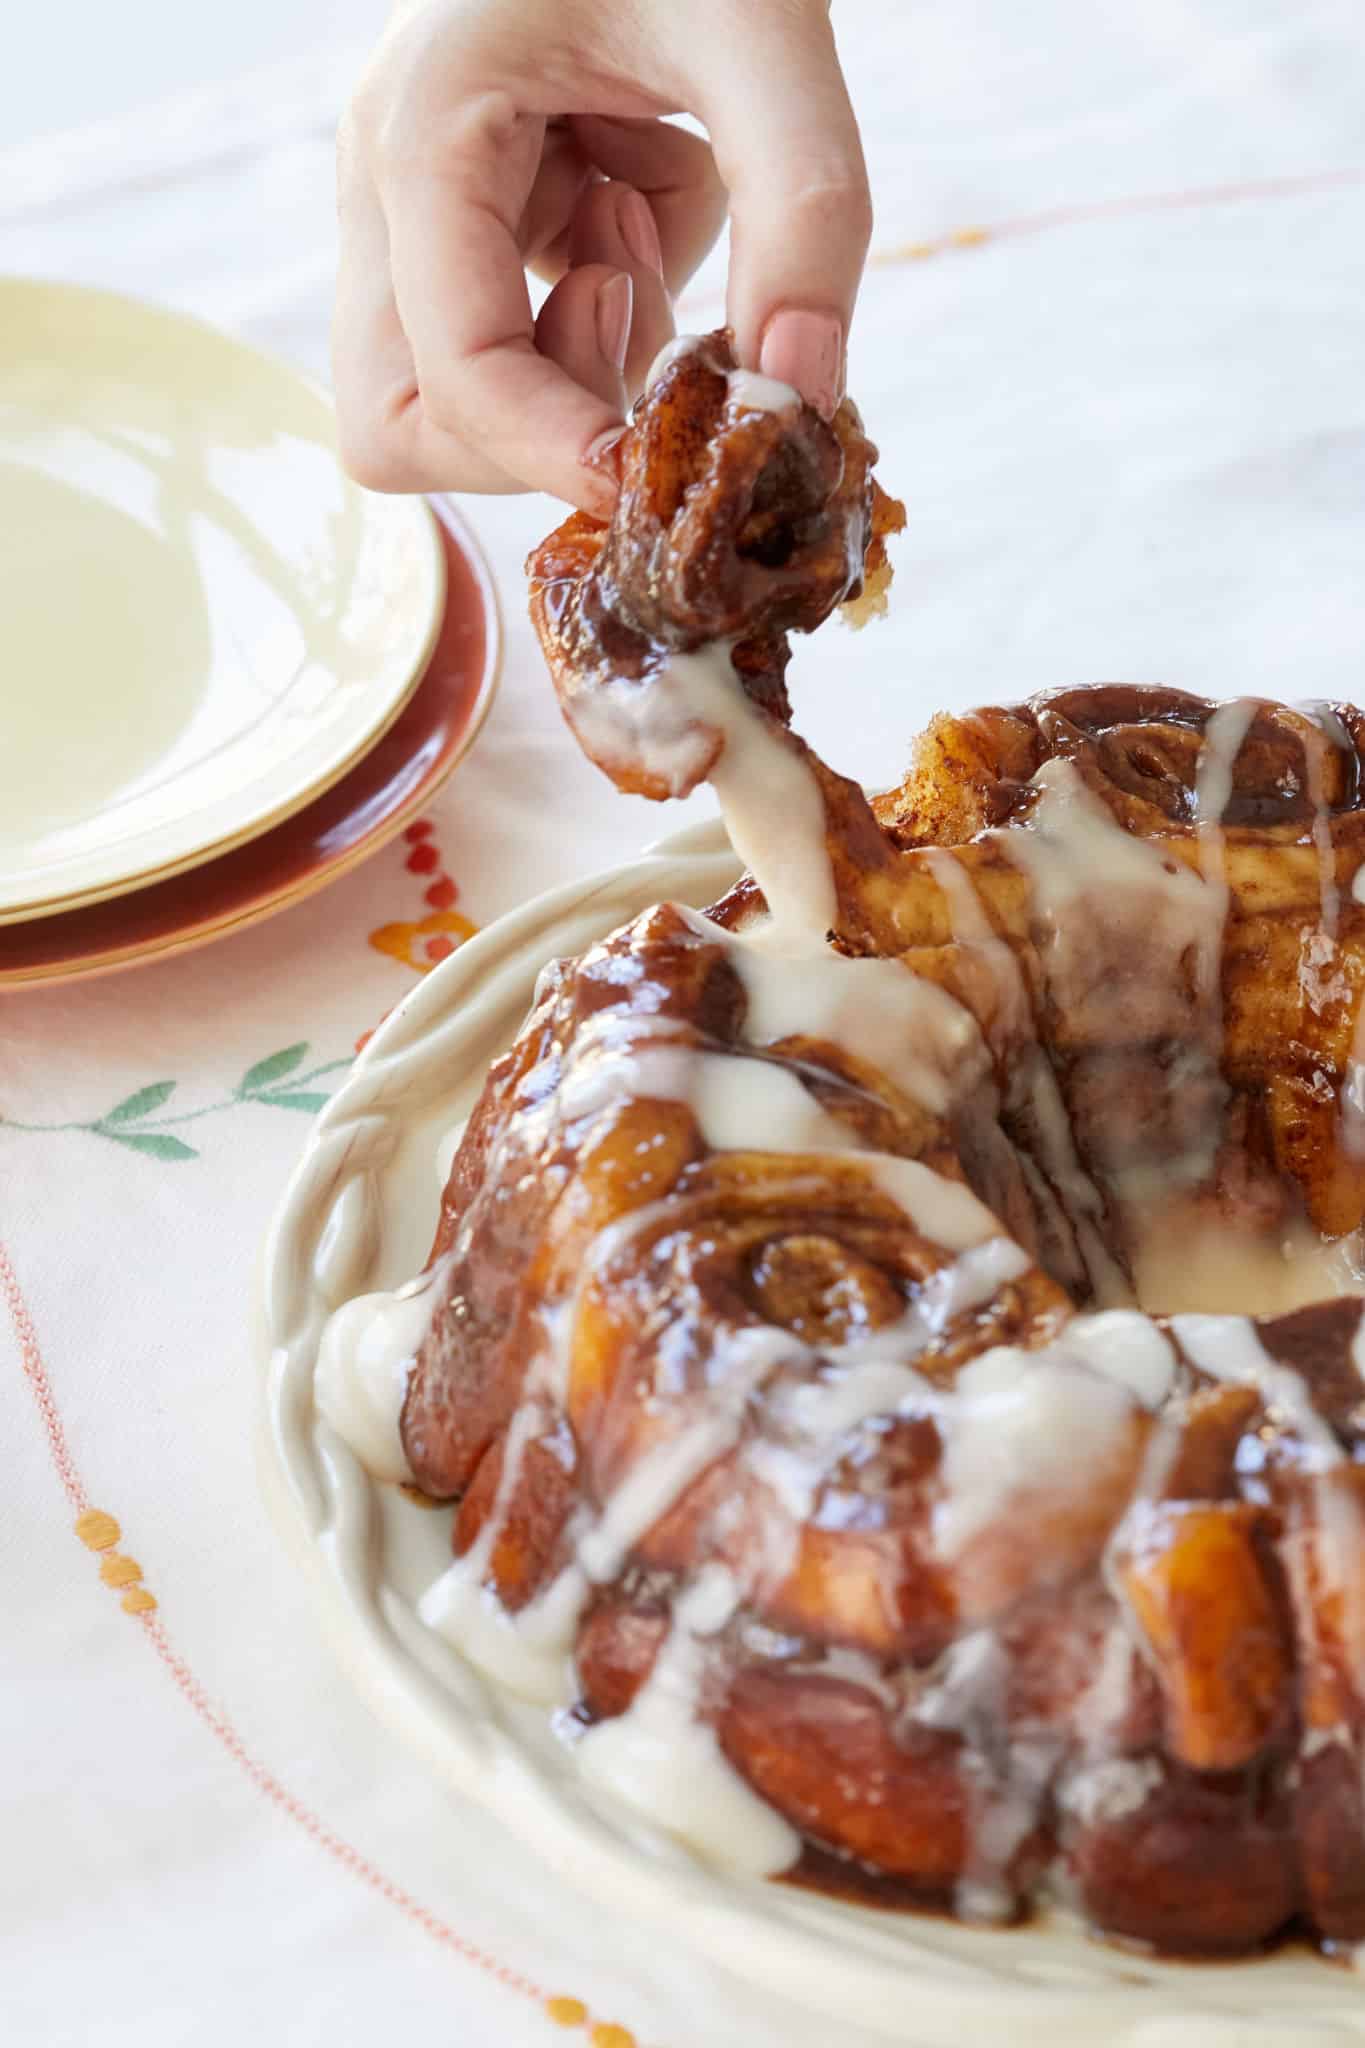 Cinnamon Roll Monkey Bread being pulled apart by a hand.